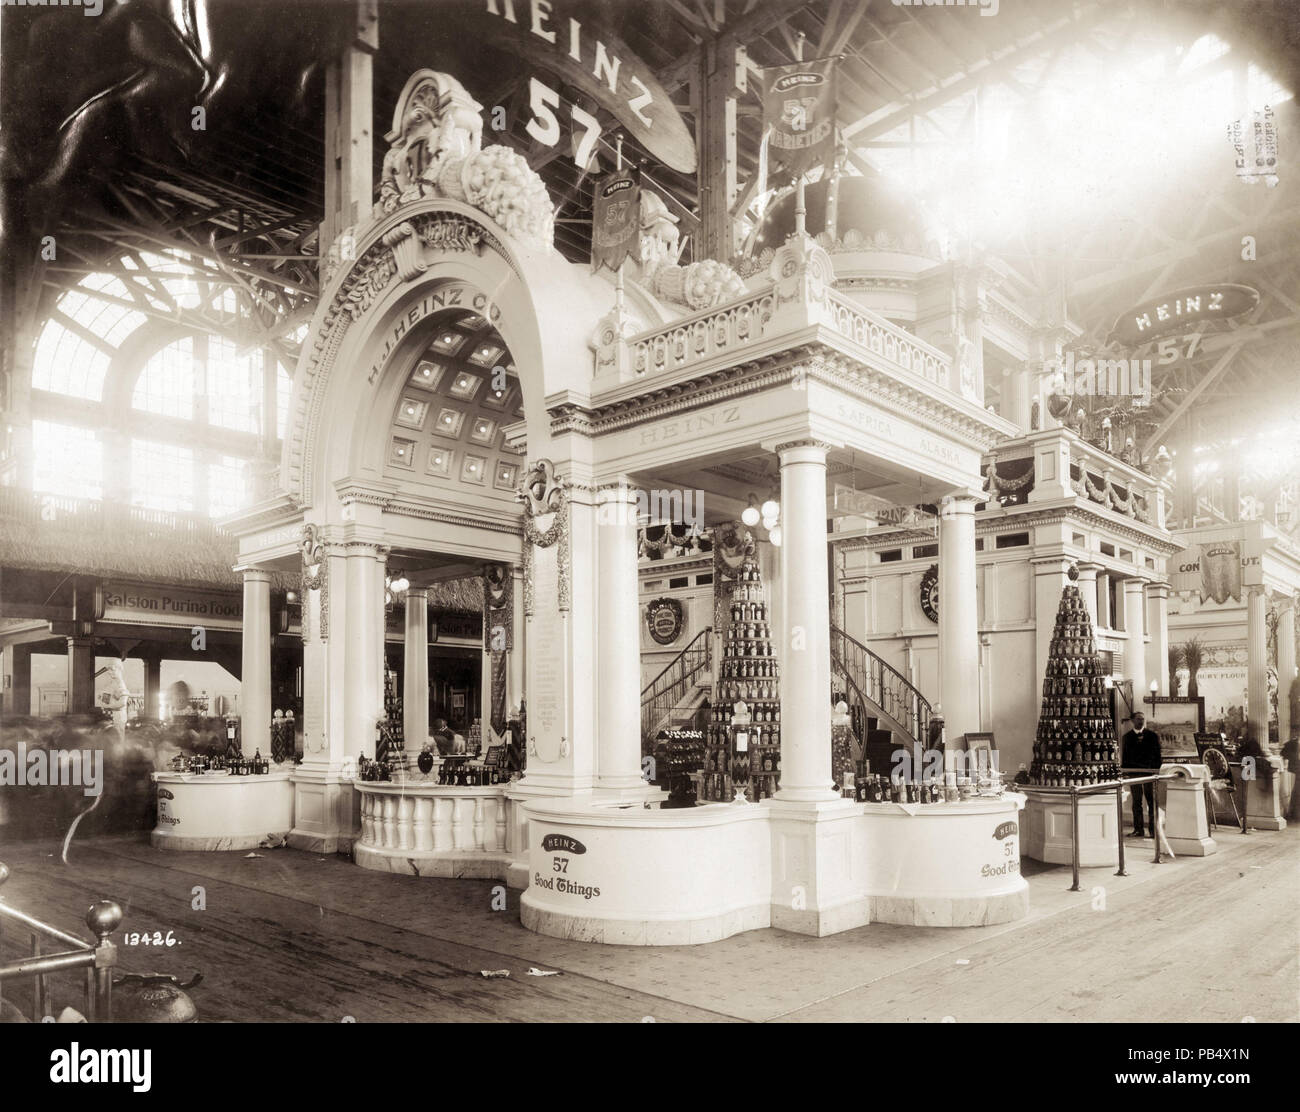 737 H. J. Heinz Company exhibit in the Palace of Agriculture at the 1904 World's Fair Stock Photo